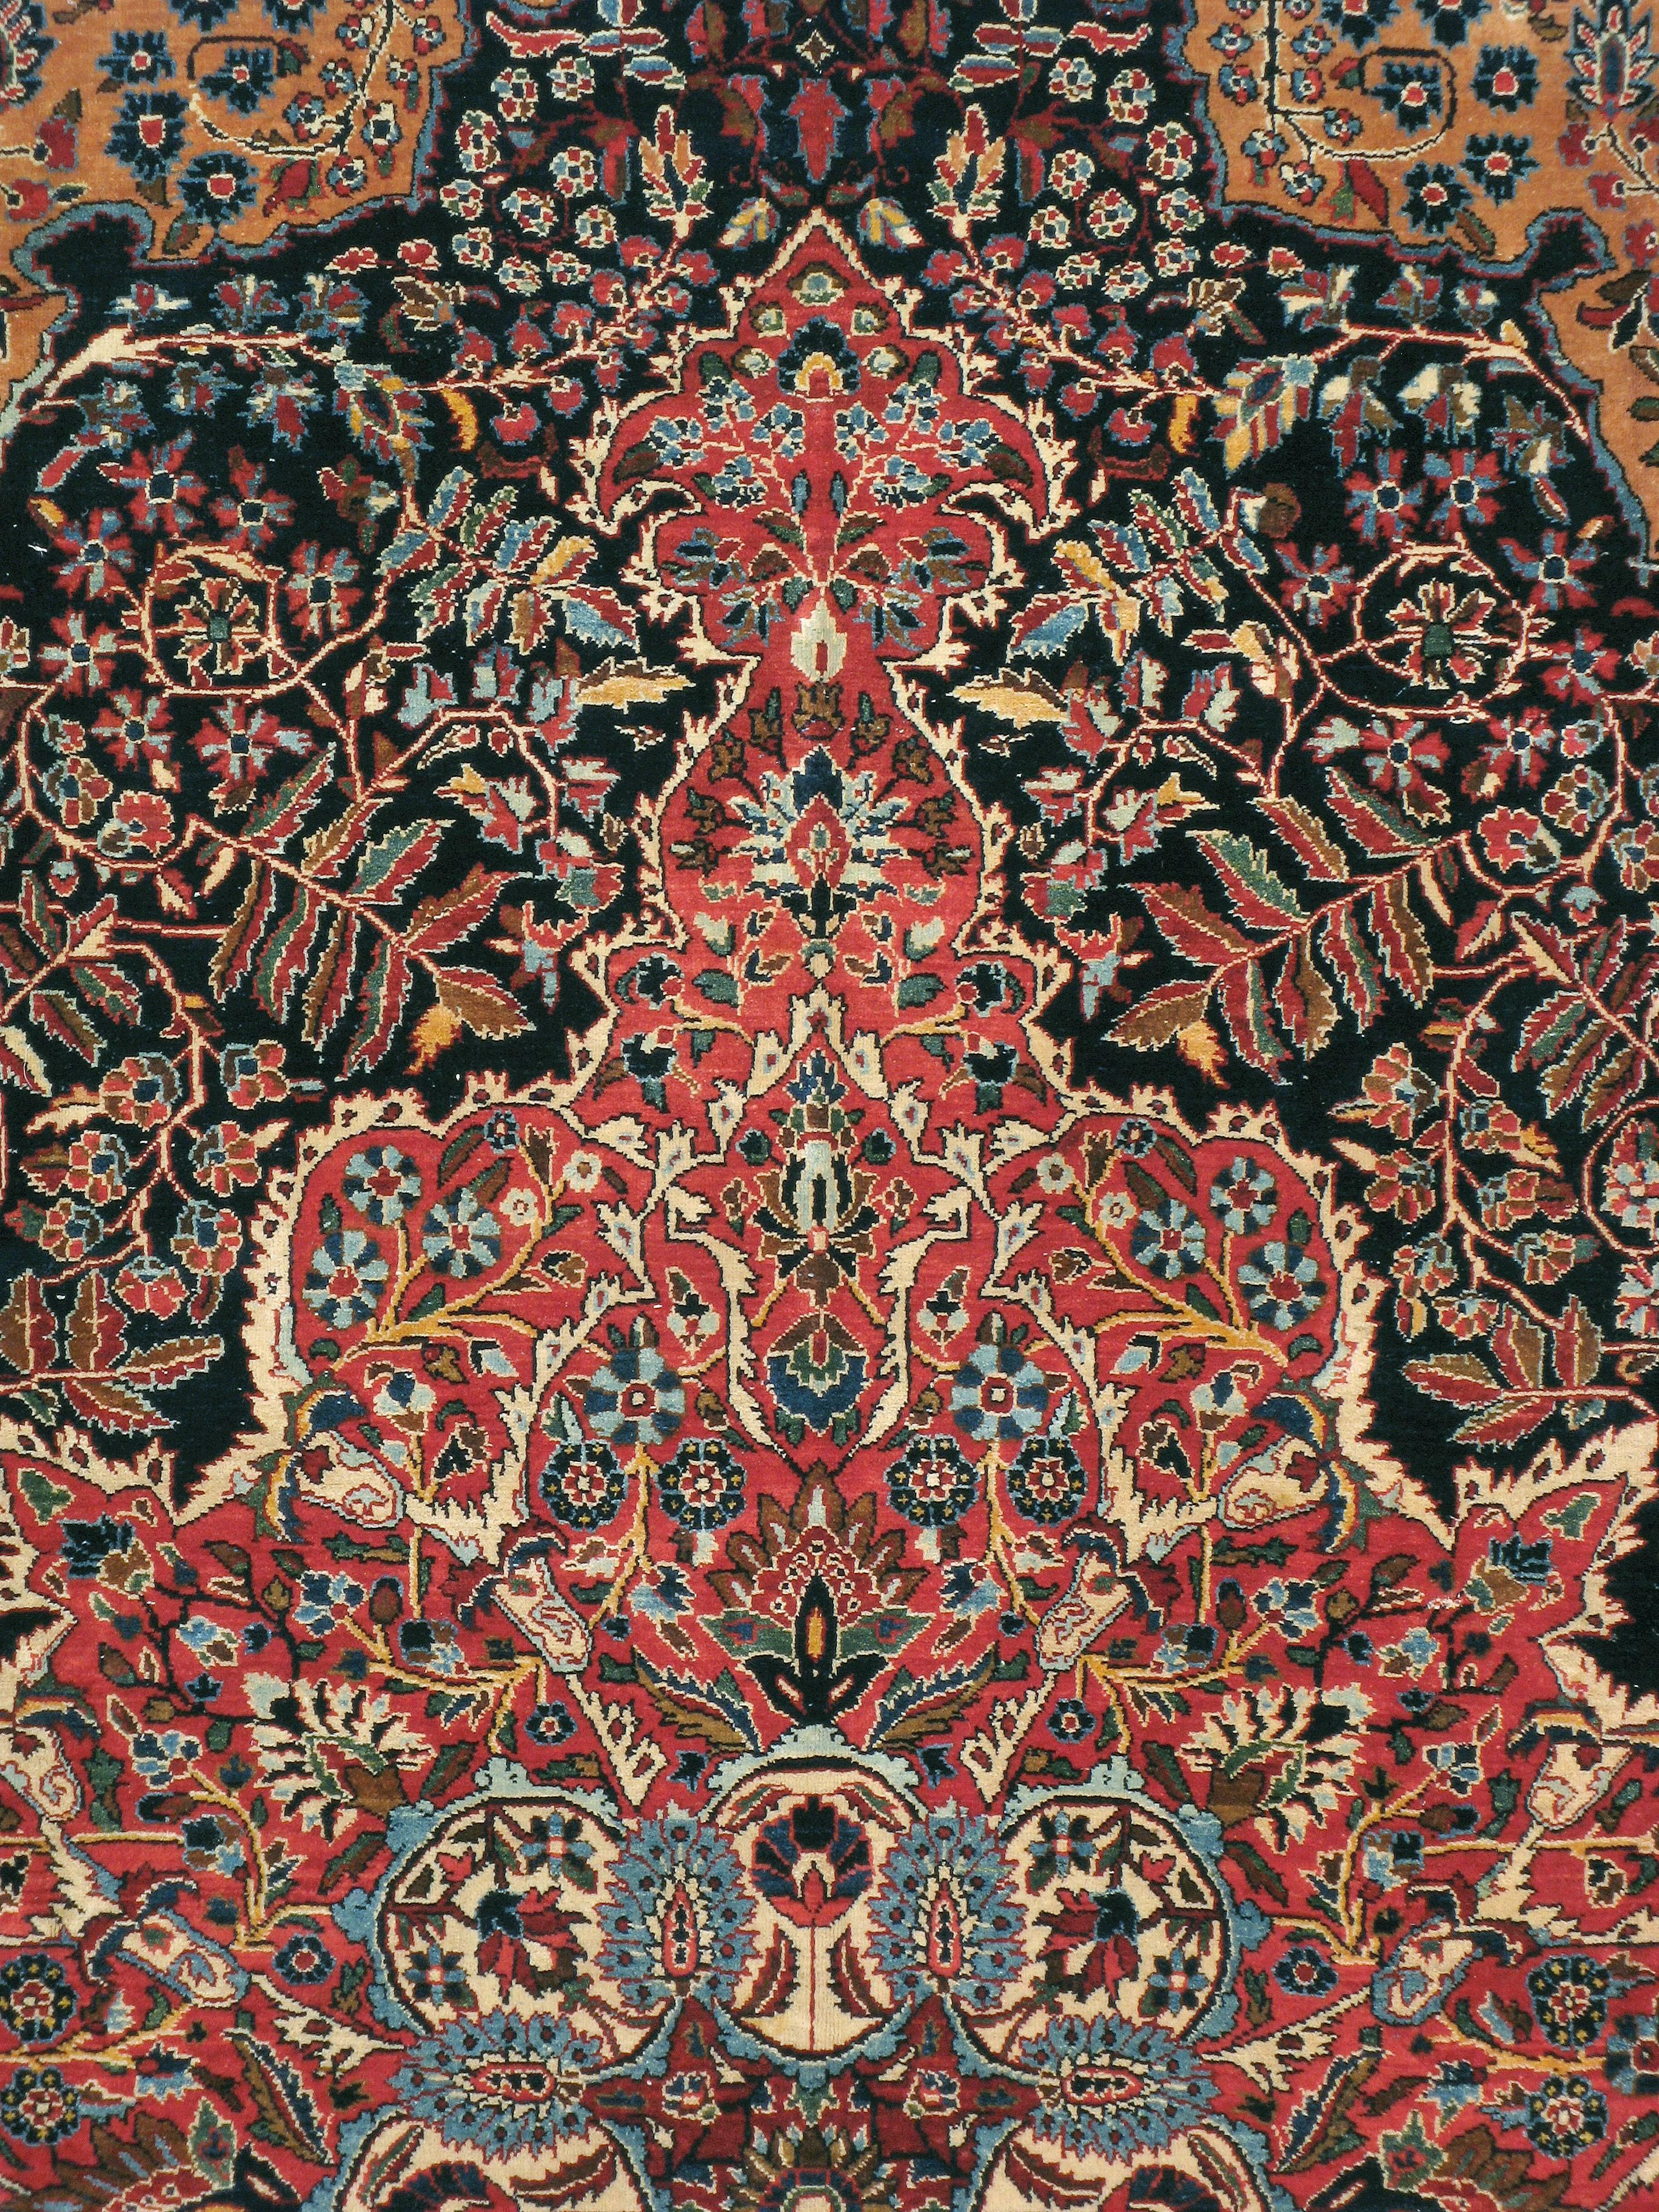 An antique Persian Sarouk carpet from the early 20th century. Even in the “American” style Sarouk period, the Arak province village weavers produced extraordinary medallion carpets and this example is one of them. A very complex red medallion is